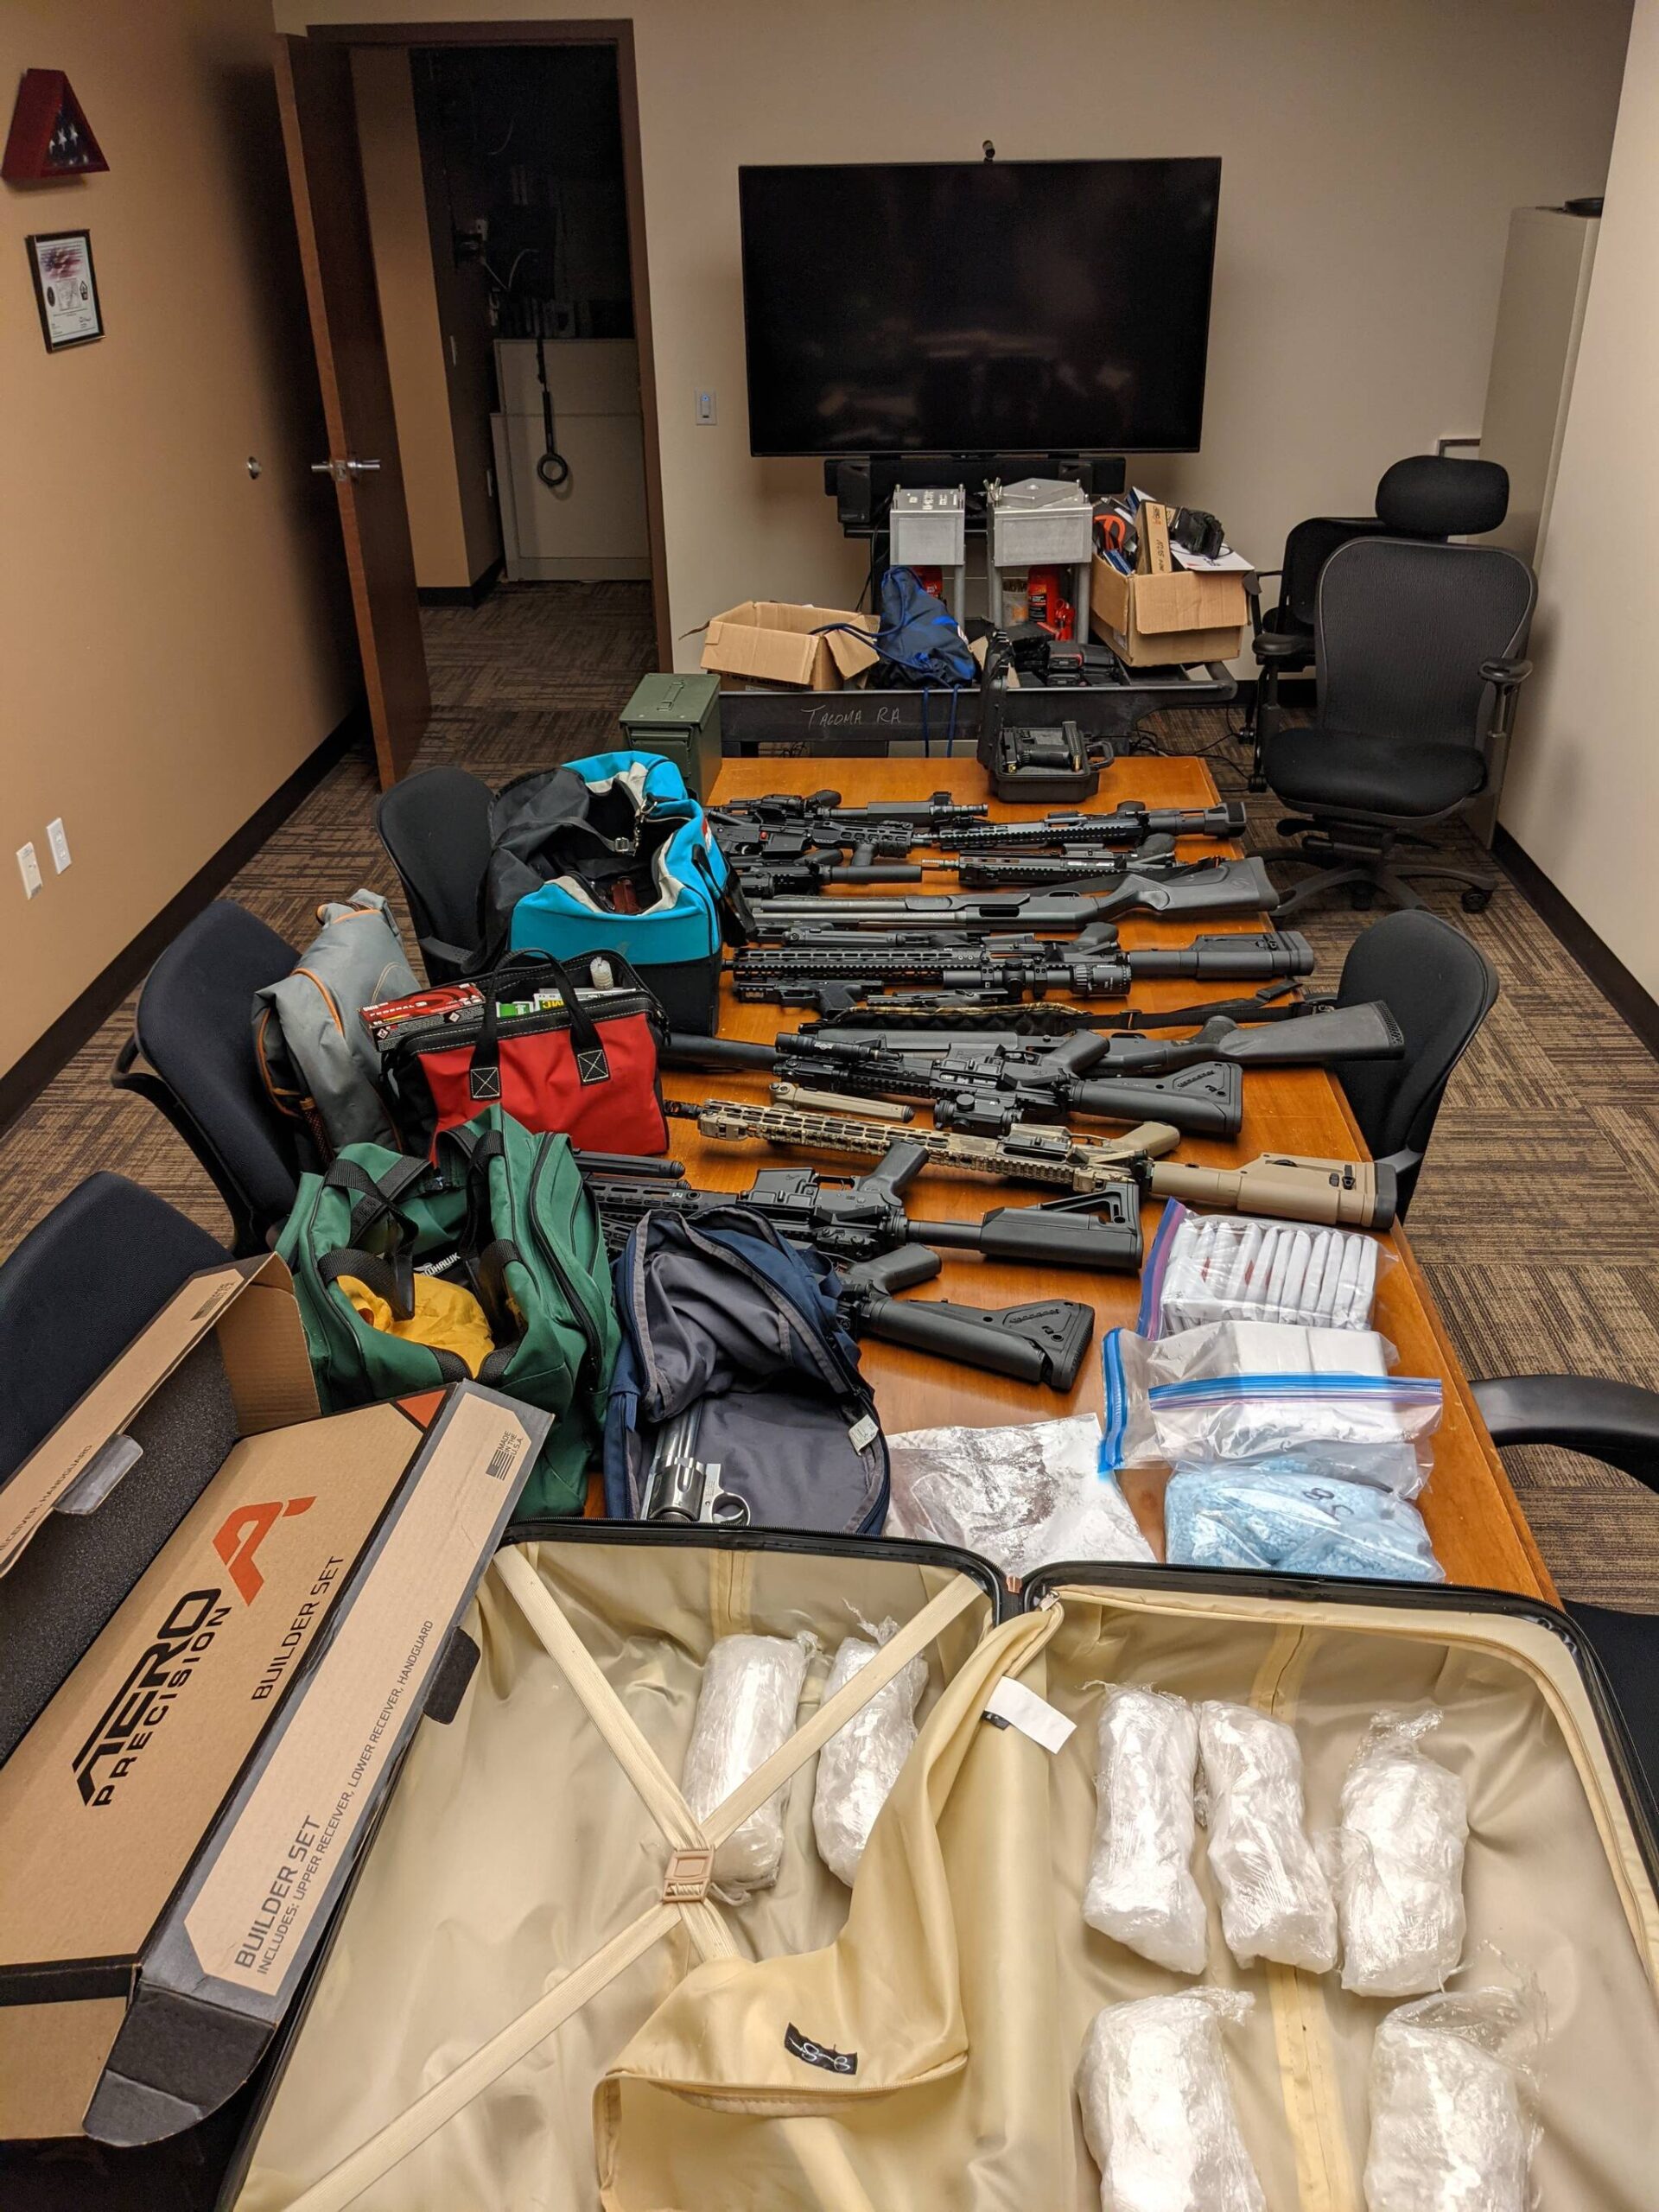 Law enforcement seized approximately 19 firearms, 3,372 grams of suspected methamphetamine, 1,322 grams of suspected fentanyl-laced pills, and over $210,000 in United States currency. (Courtesy of the Department of Justice)